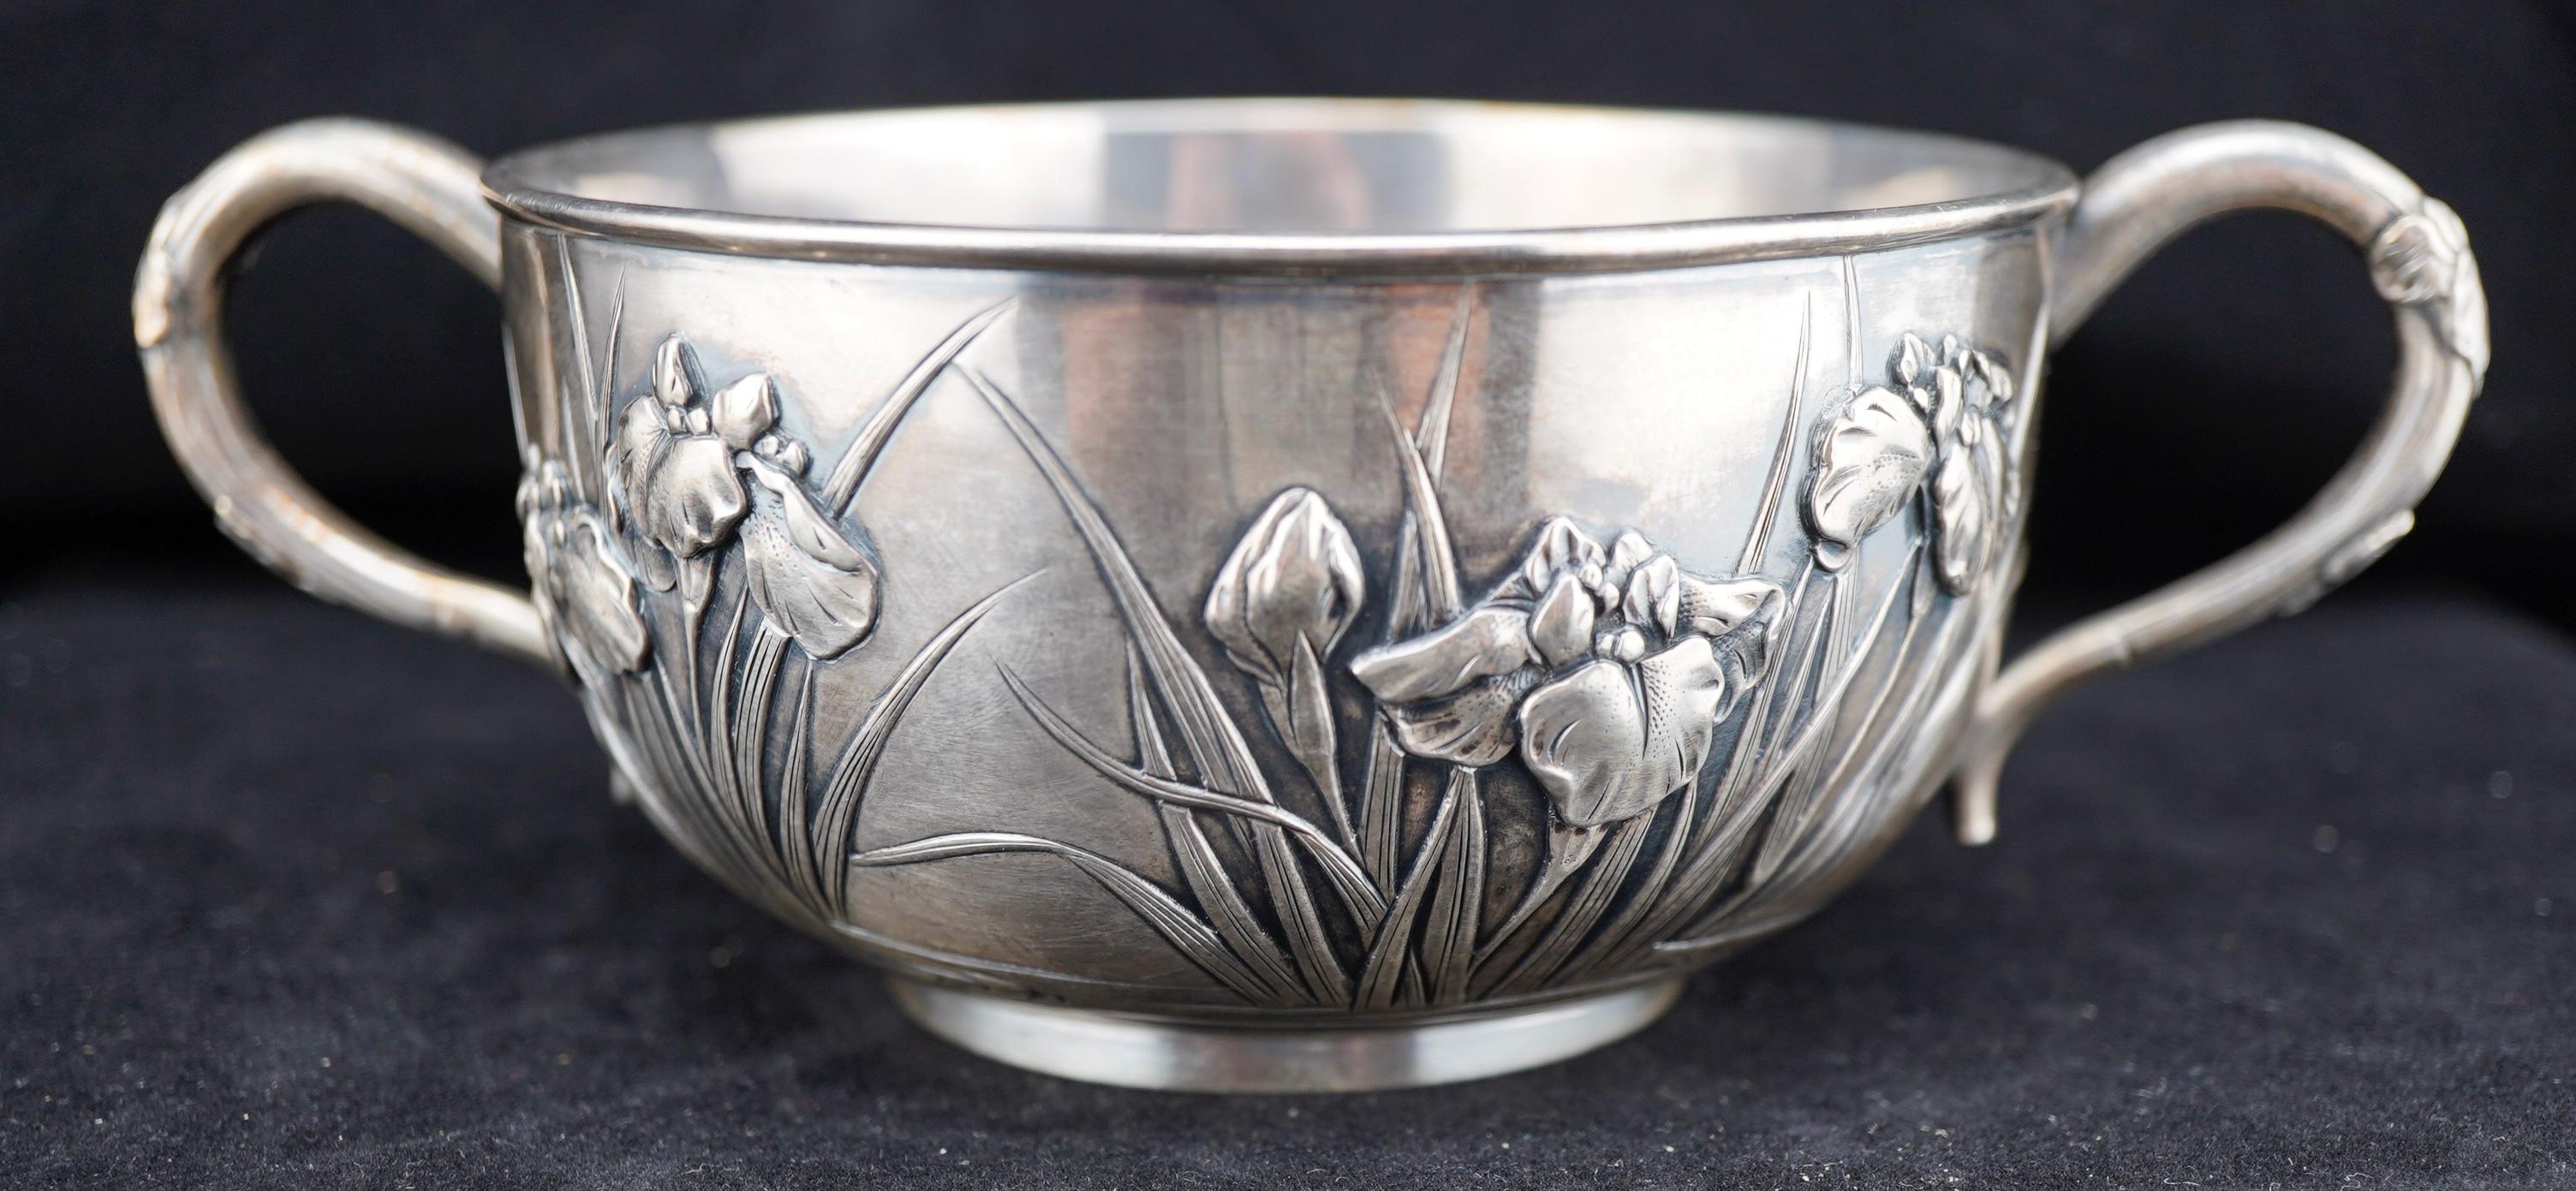 Cast Japanese Silver Bowl with Irises by Konoike, Meji Period For Sale